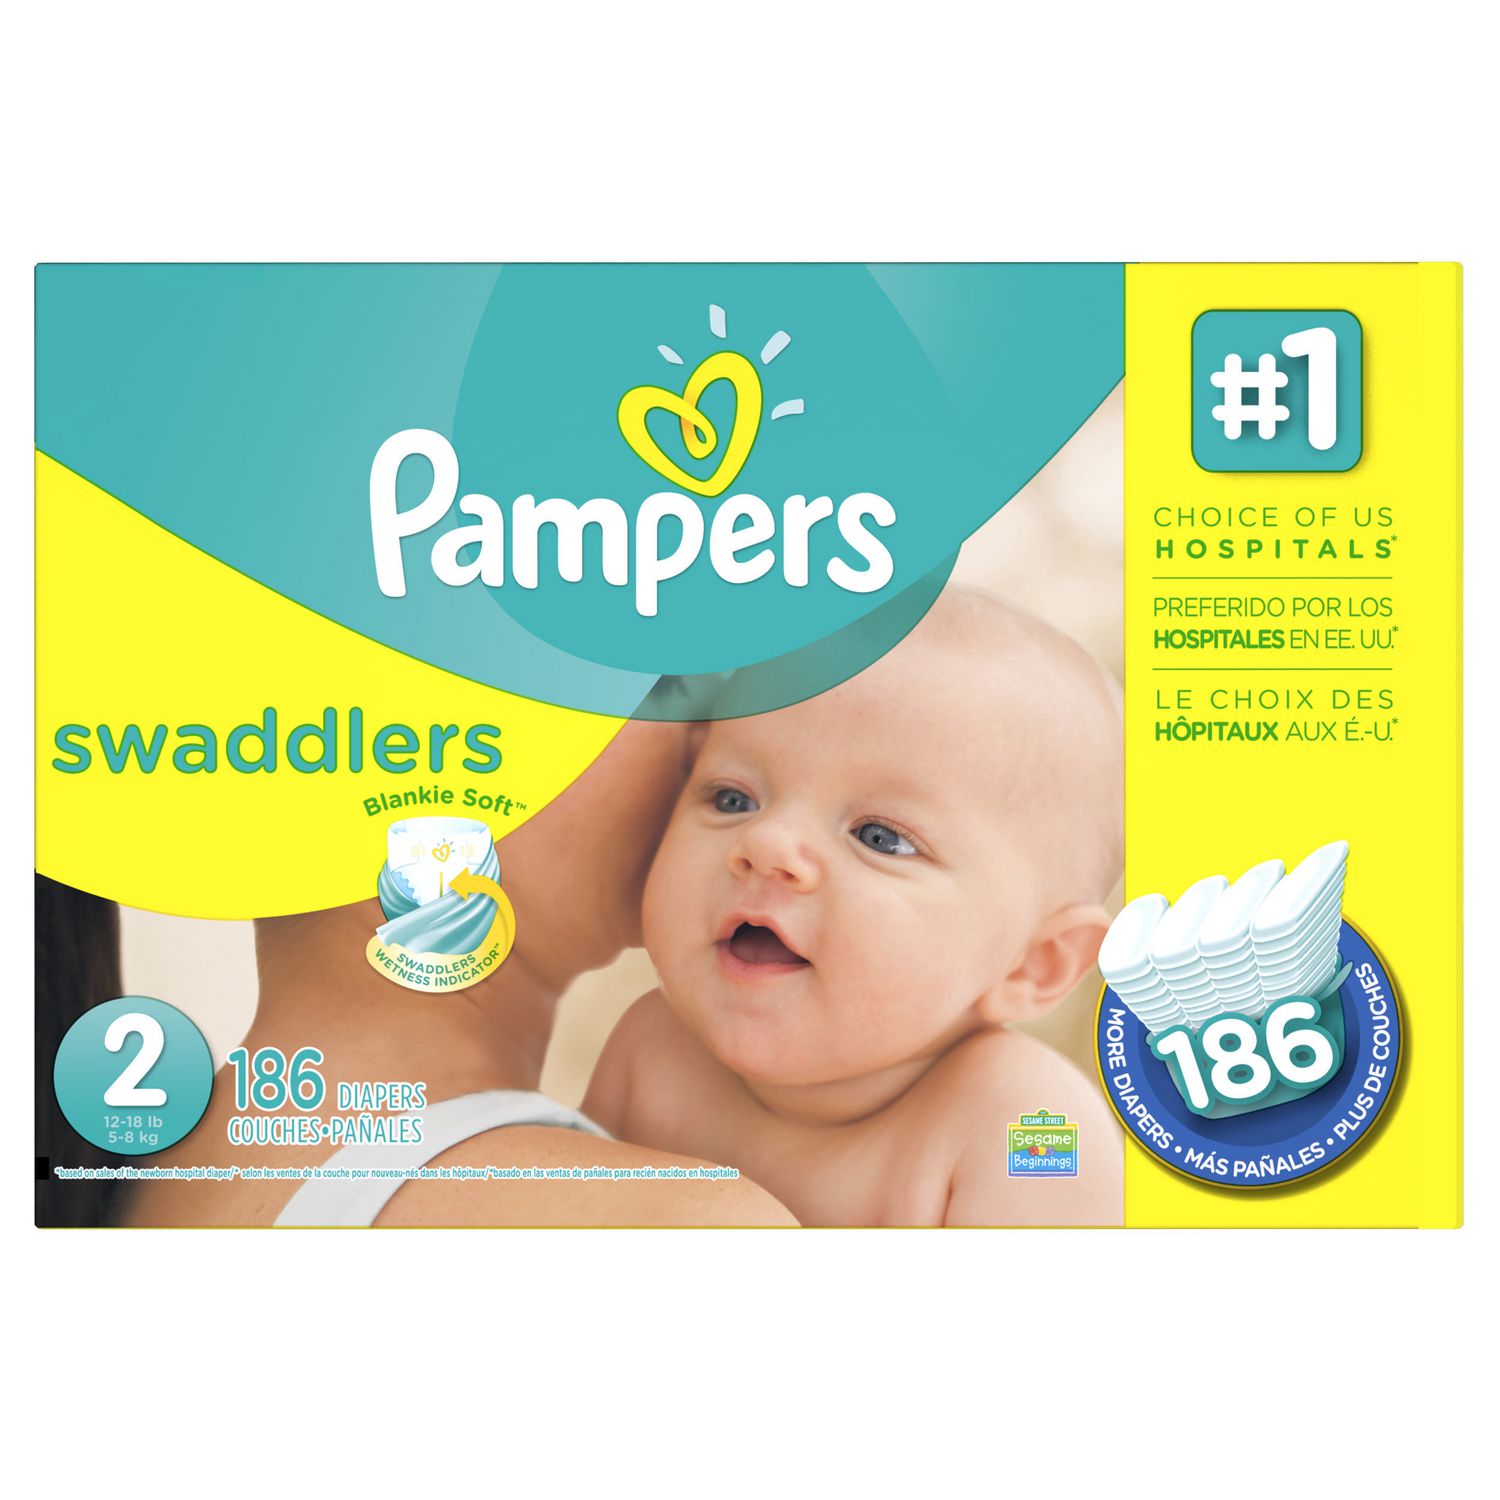 Pampers Swaddlers Diapers Economy Pack 